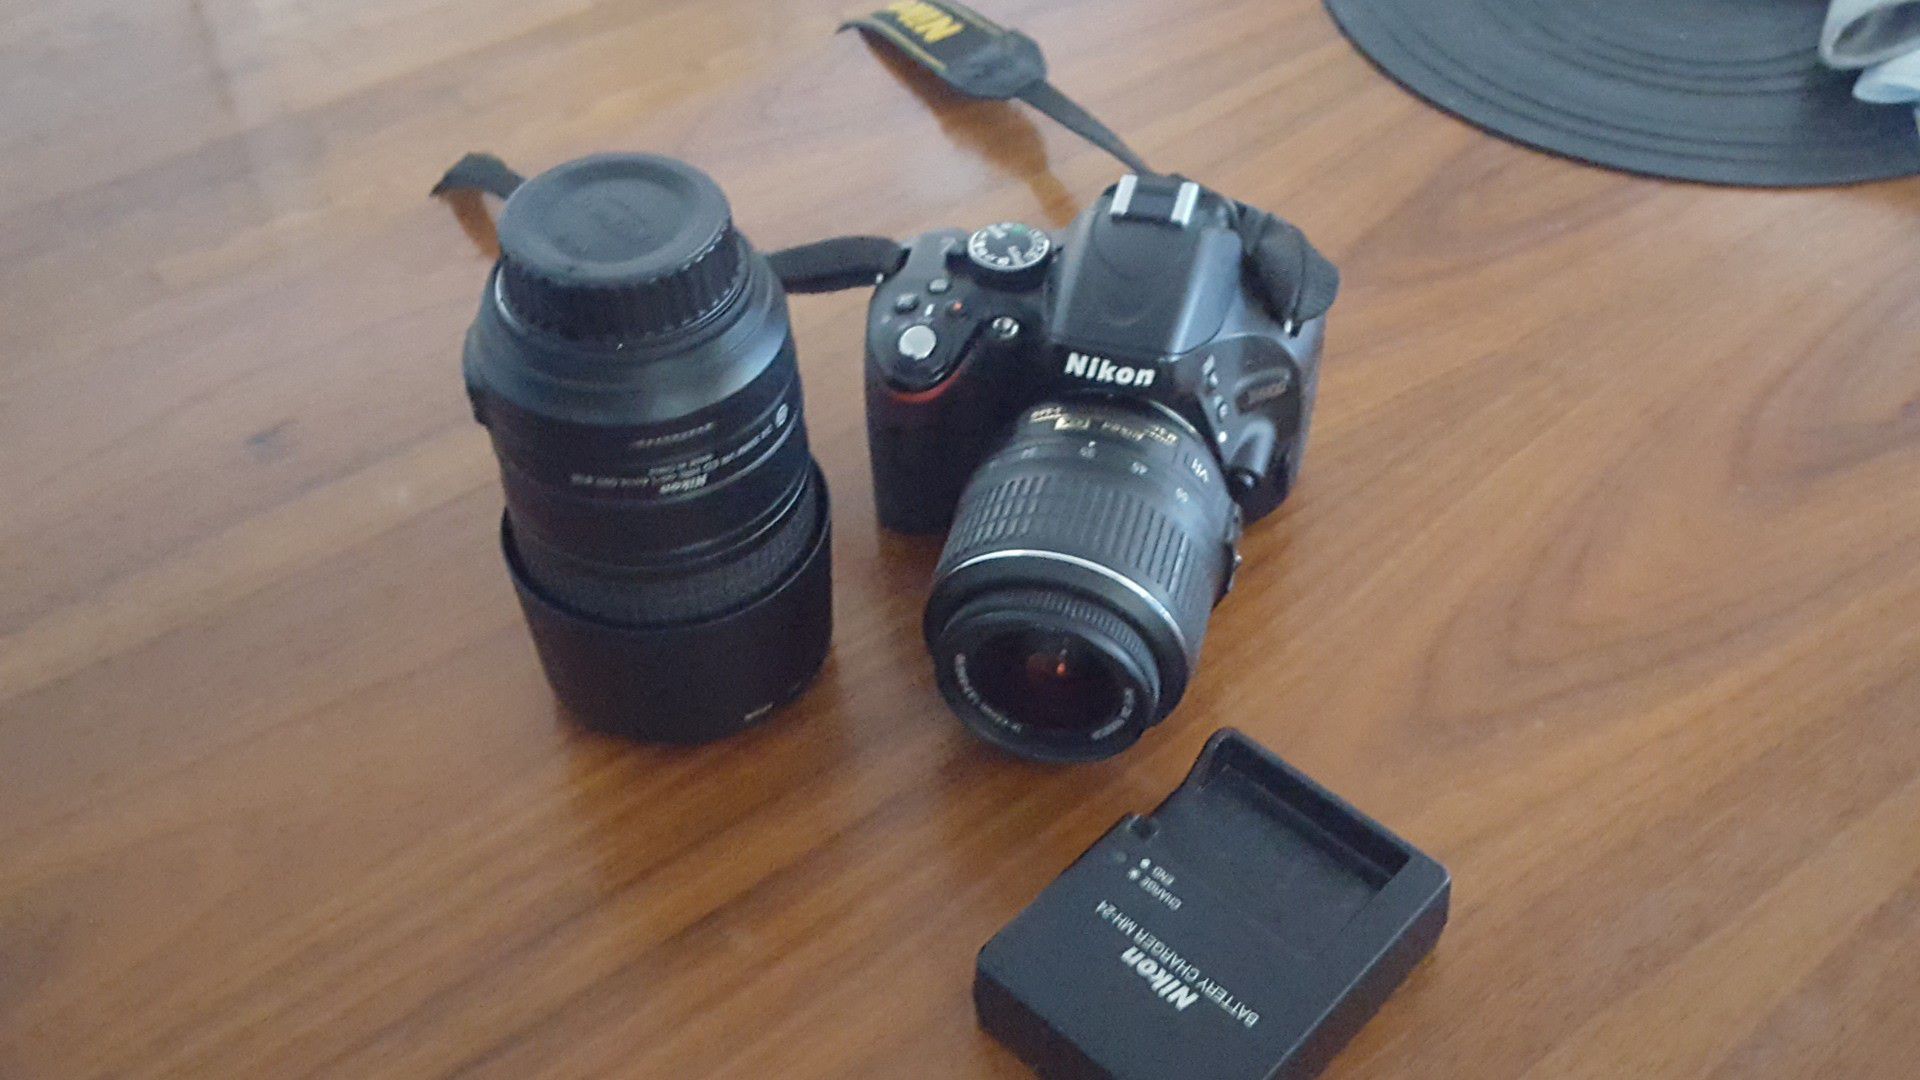 Nikon D5100 and lense. Also an additional lense and charger. I believe are nonfunctional?